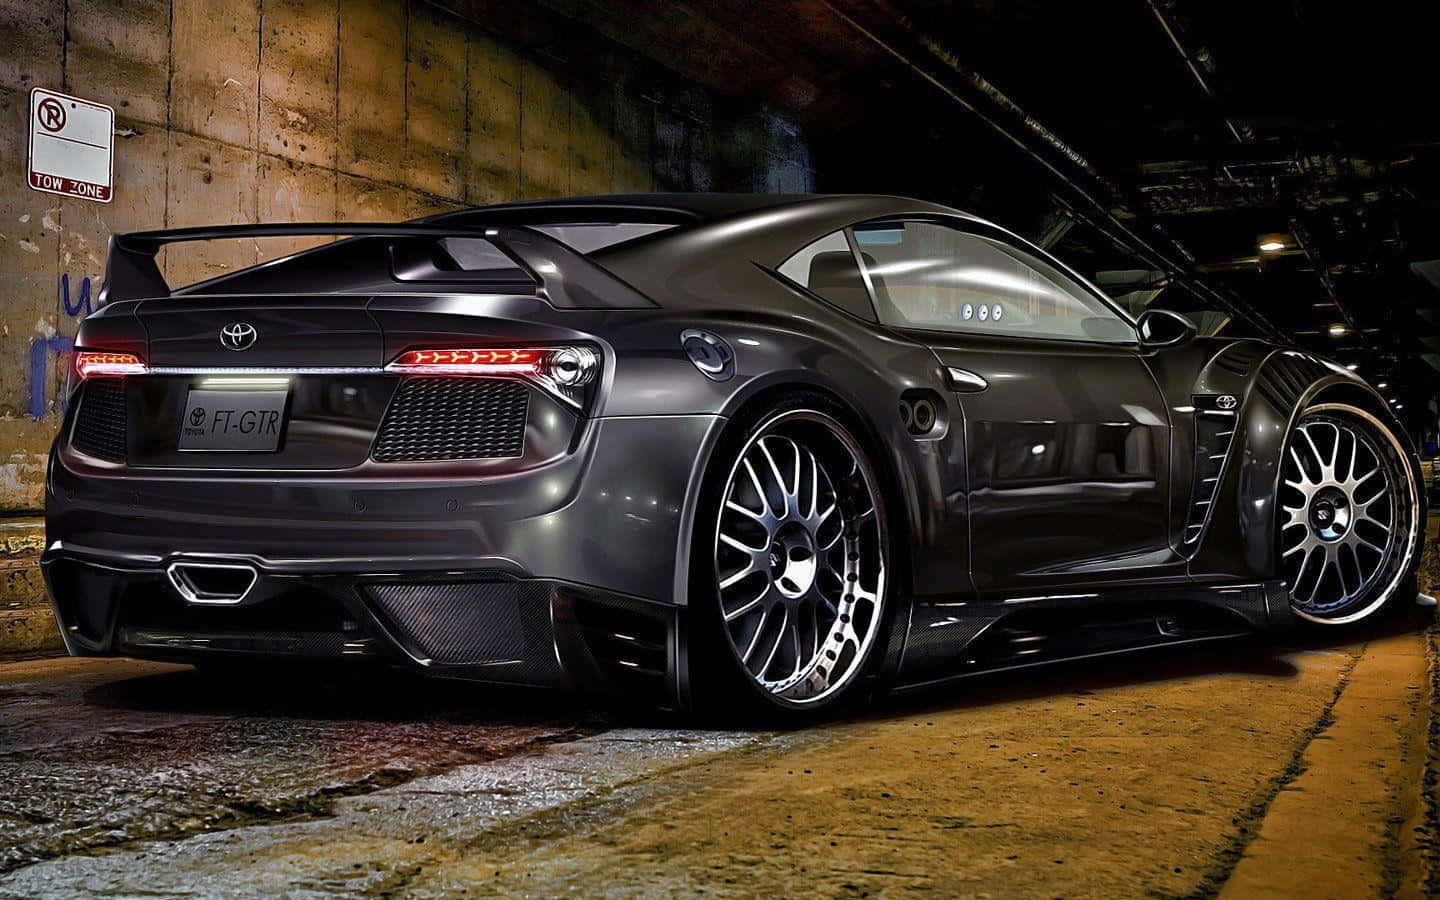 Stunning Modified Car Showcased in Style Wallpaper